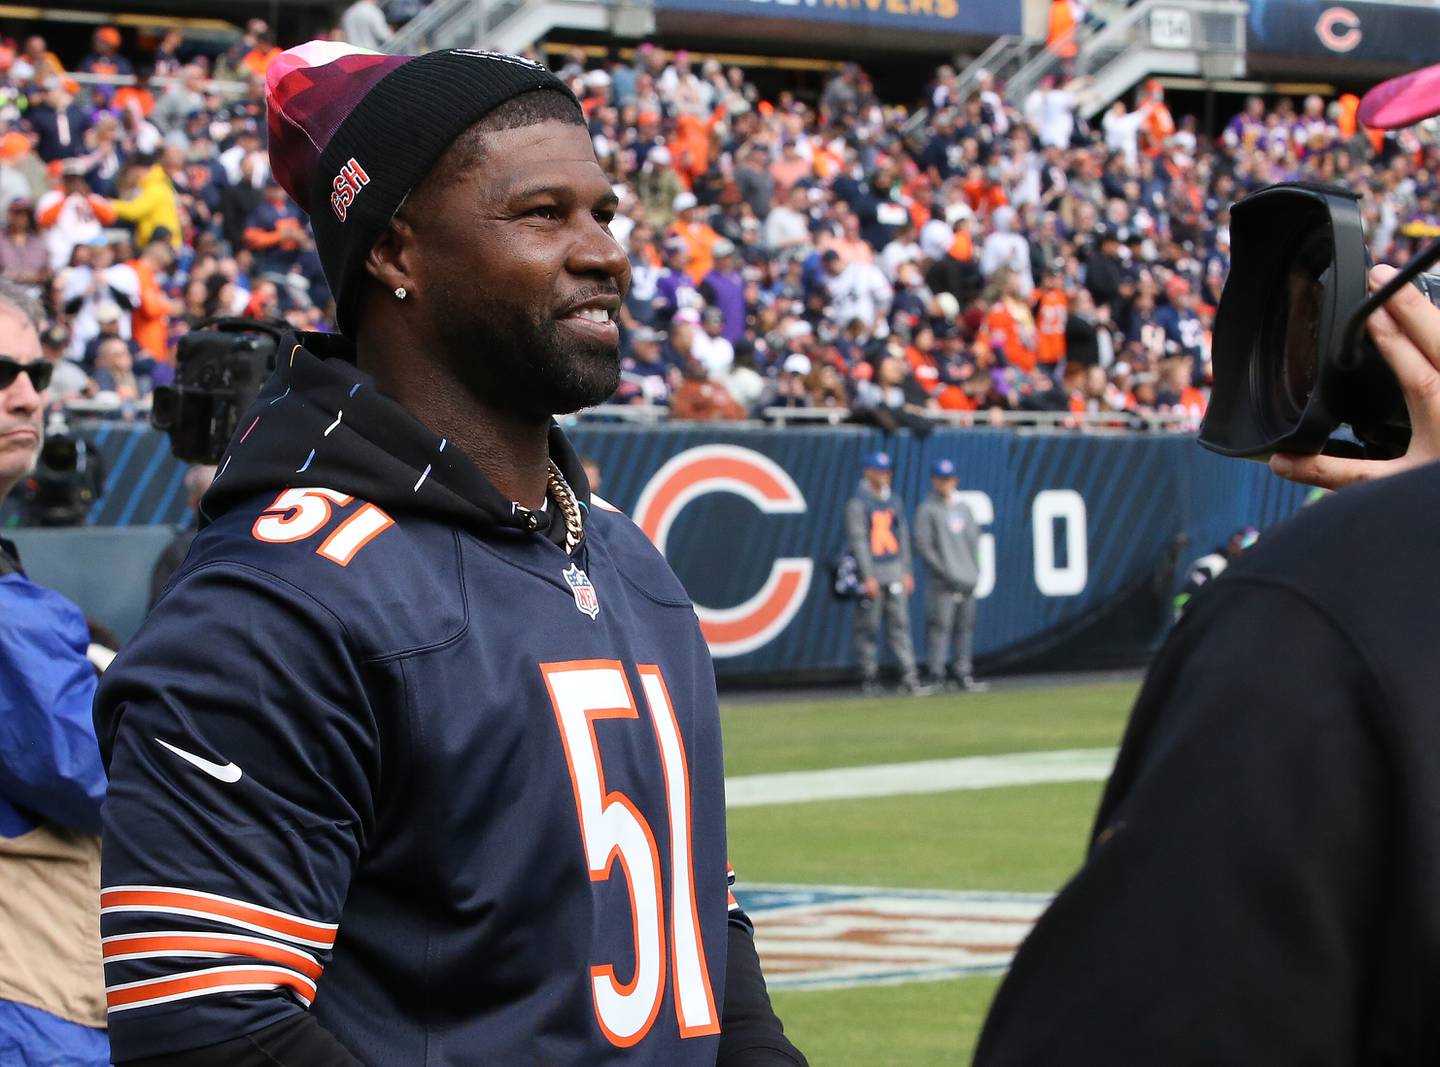 Chicago Bears former player Devin Hester wears a Dick Butkus jersey while watching on the sidelines on Sunday, Oct. 15, 2023 at Soldier Field.